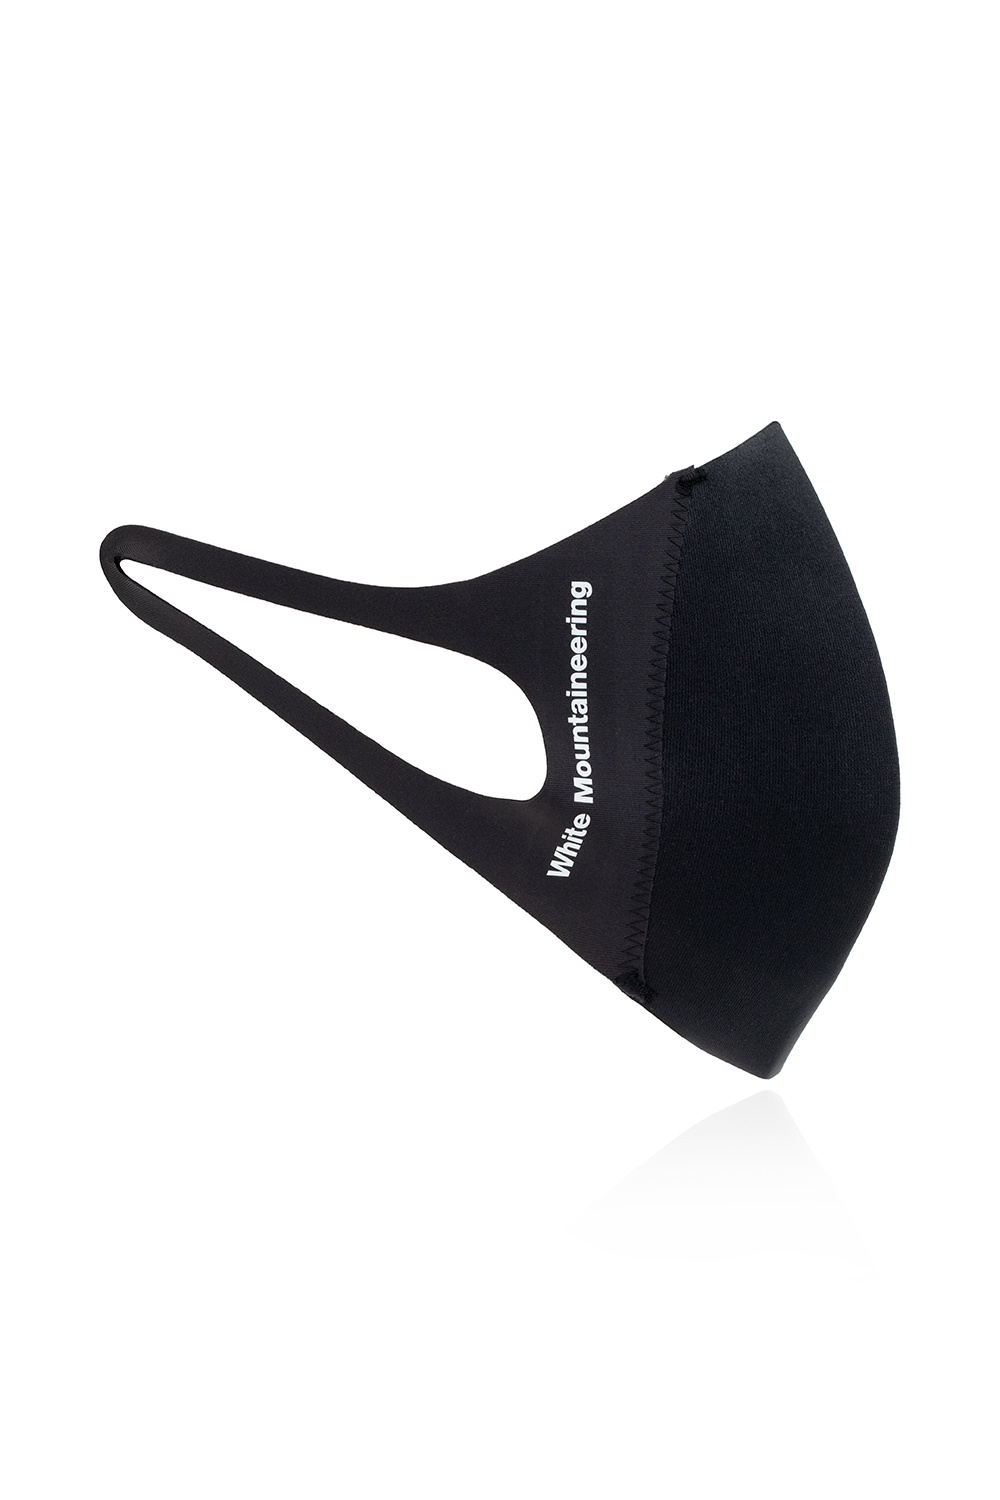 White Mountaineering Mask with logo